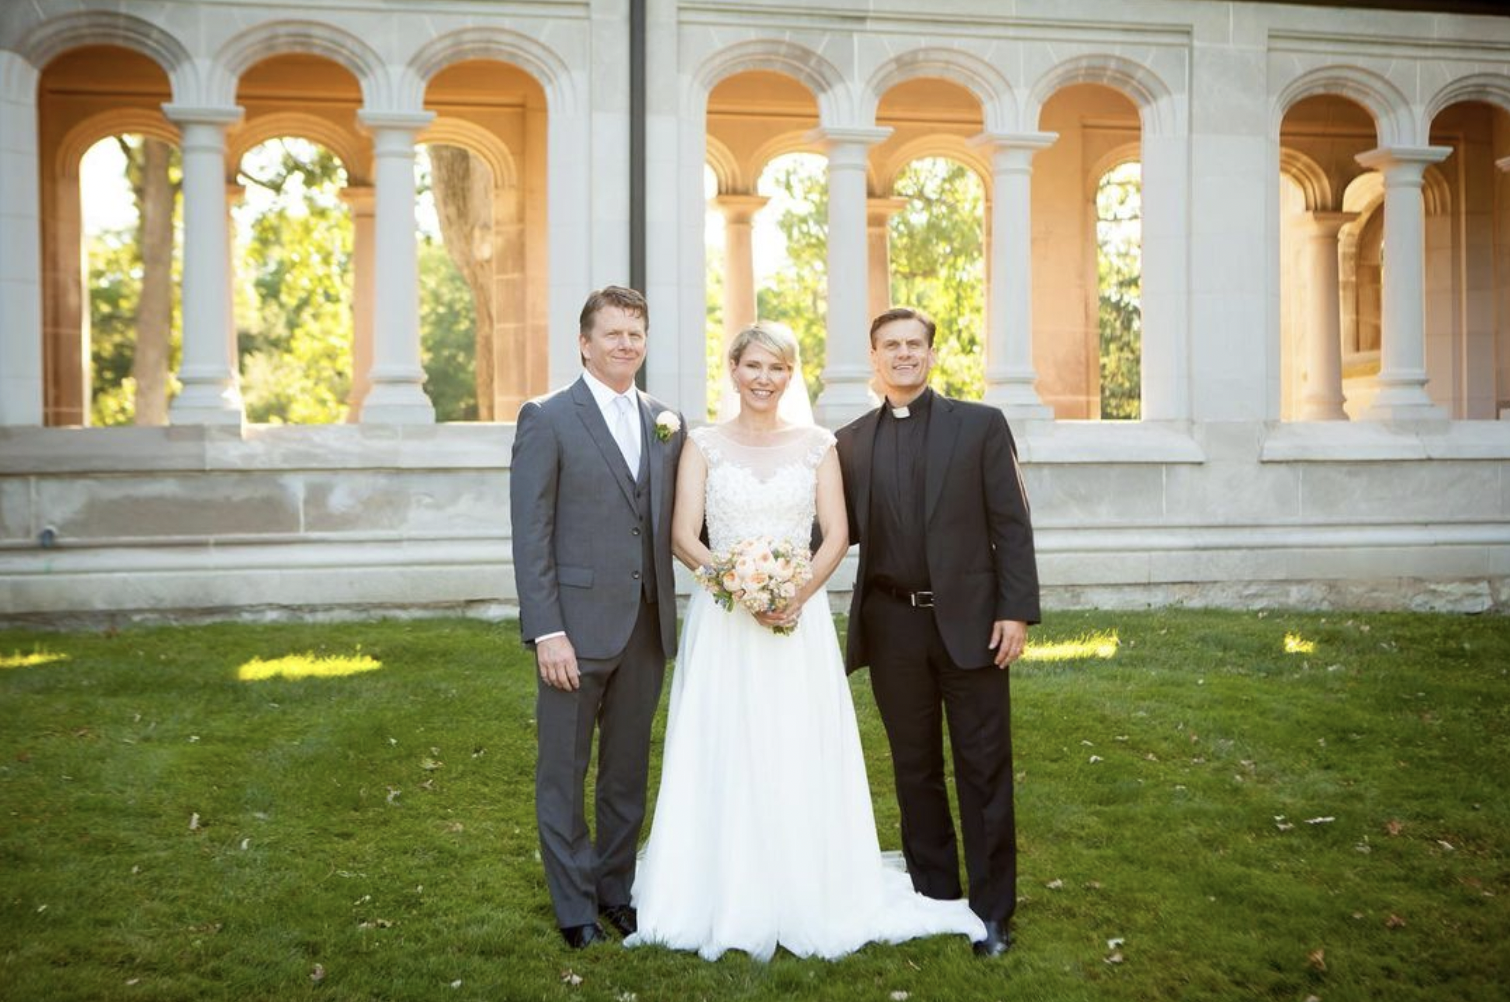 Bride, groom, and wedding officiant pose for portrait after wedding ceremony